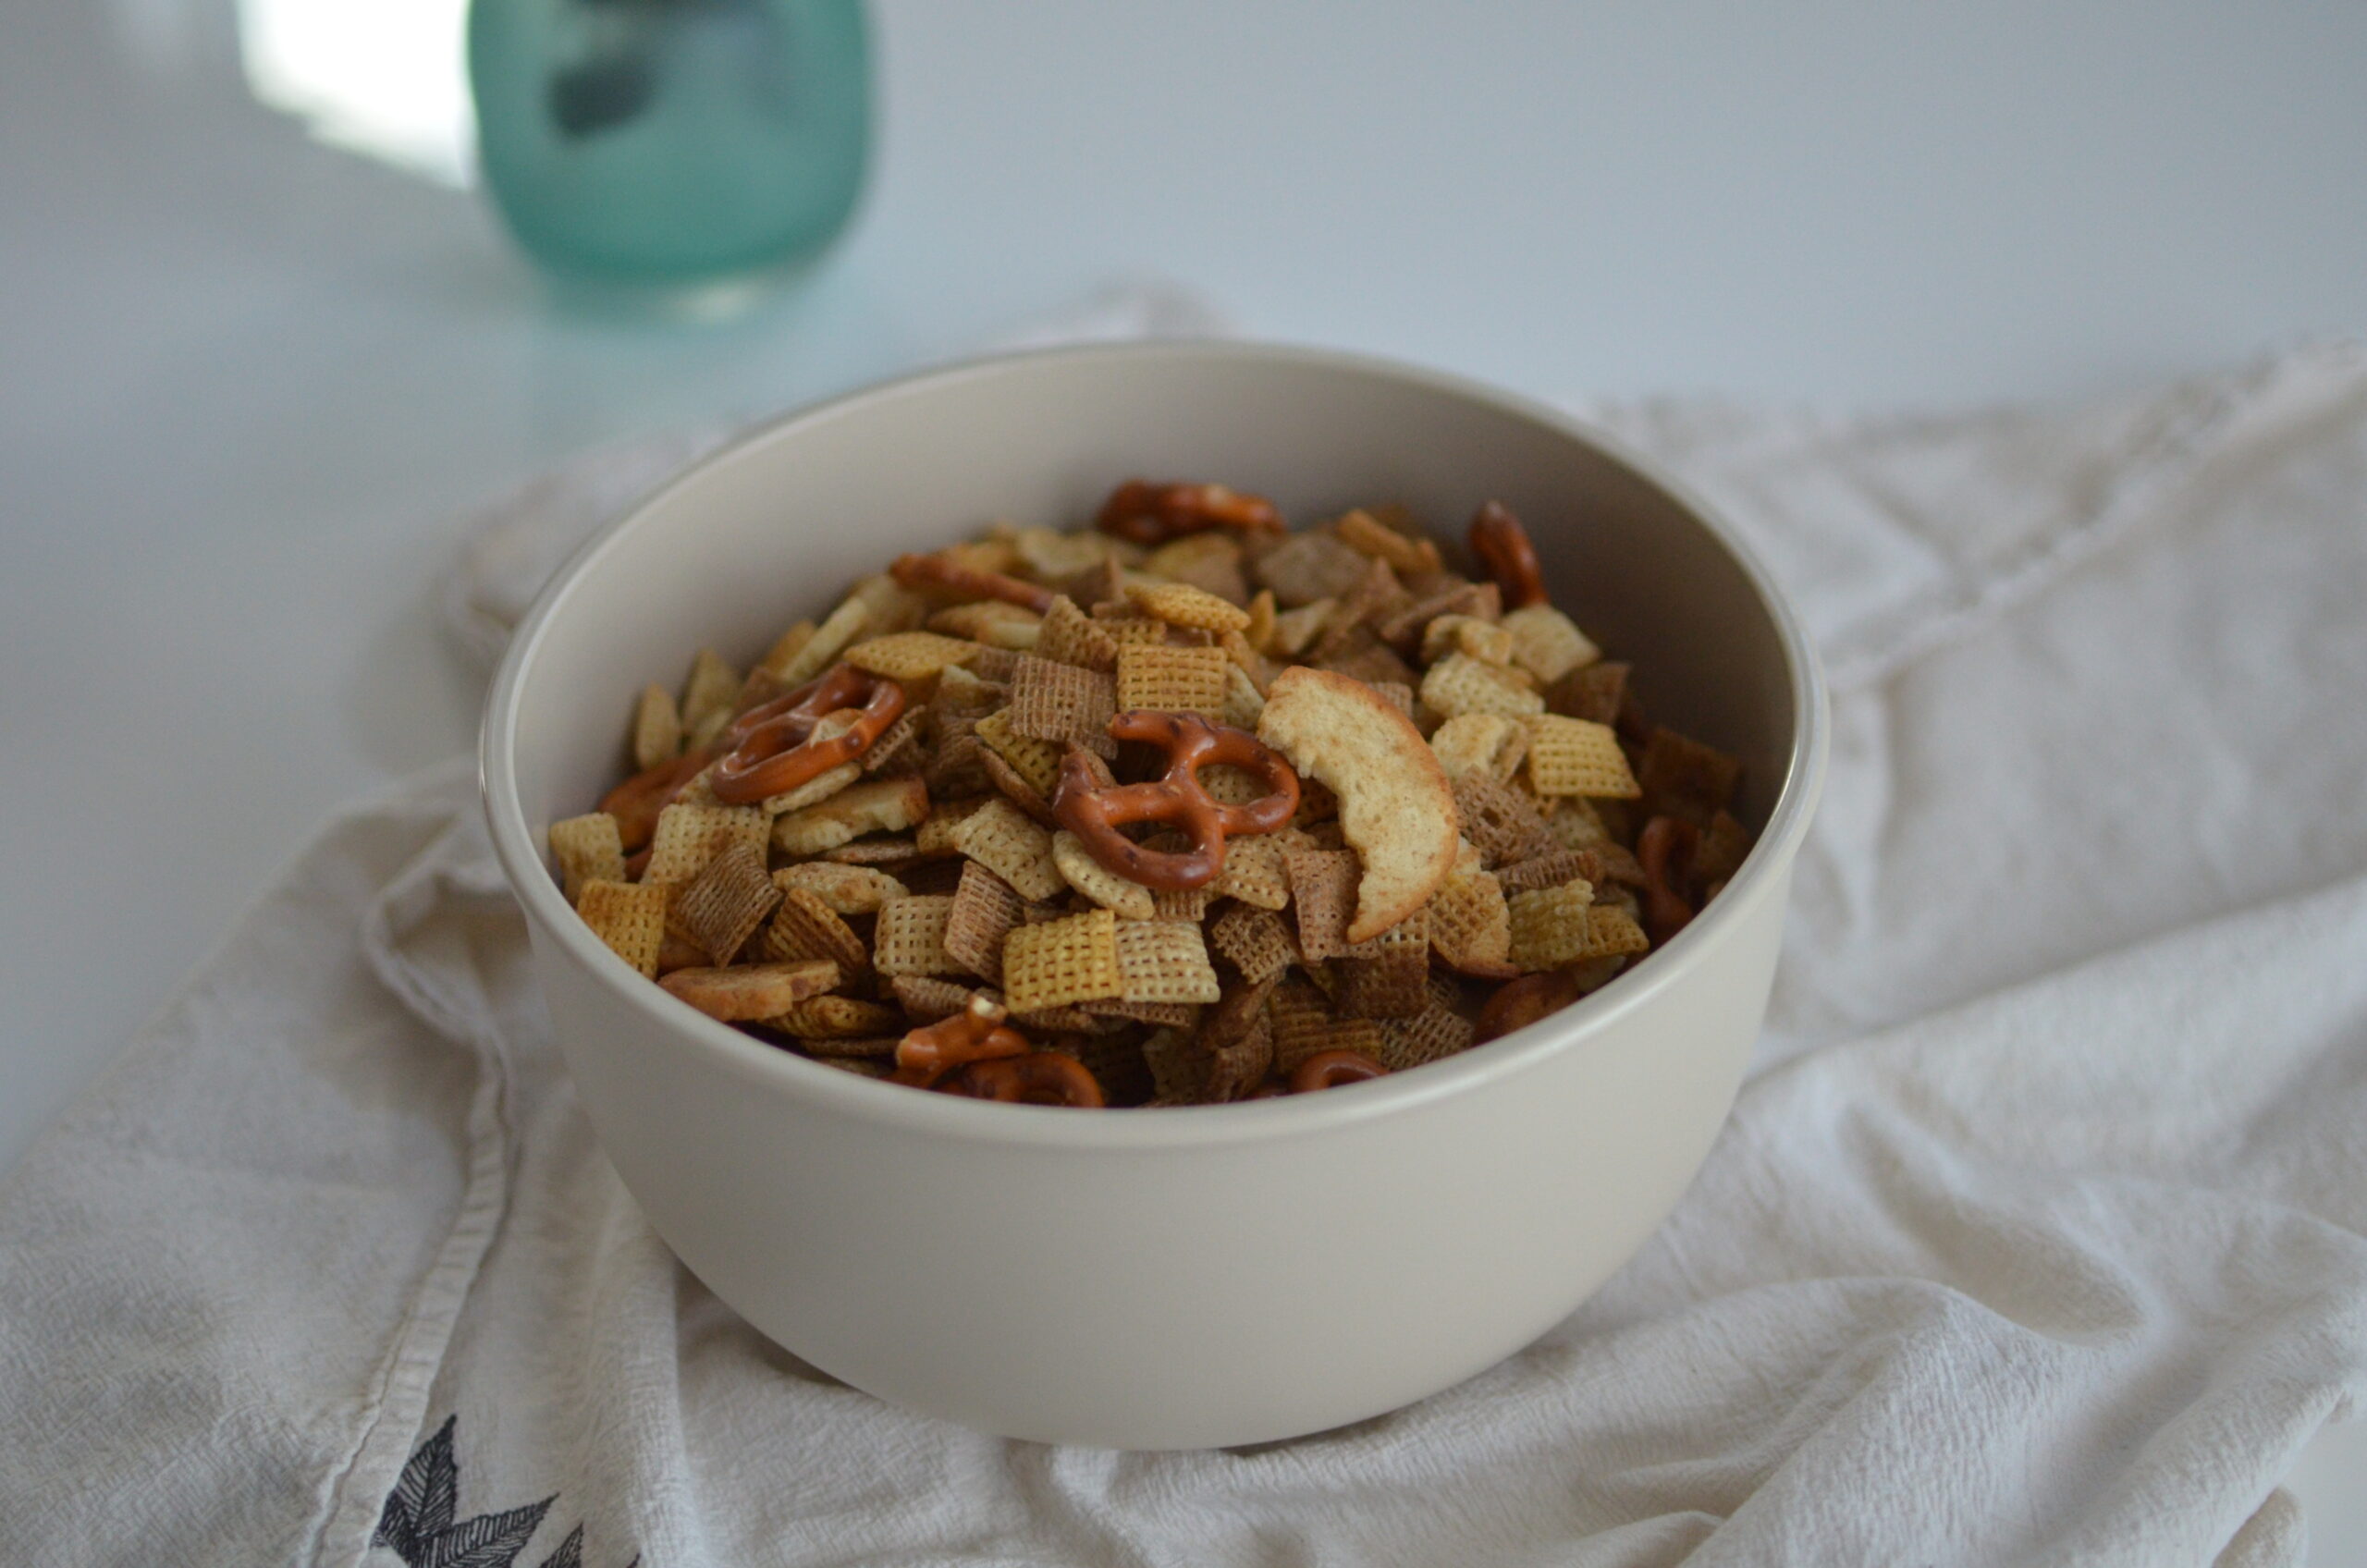 Game night with a fresh, homemade batch of Chex Mix? That’s a guaranteed-win on our score sheet.